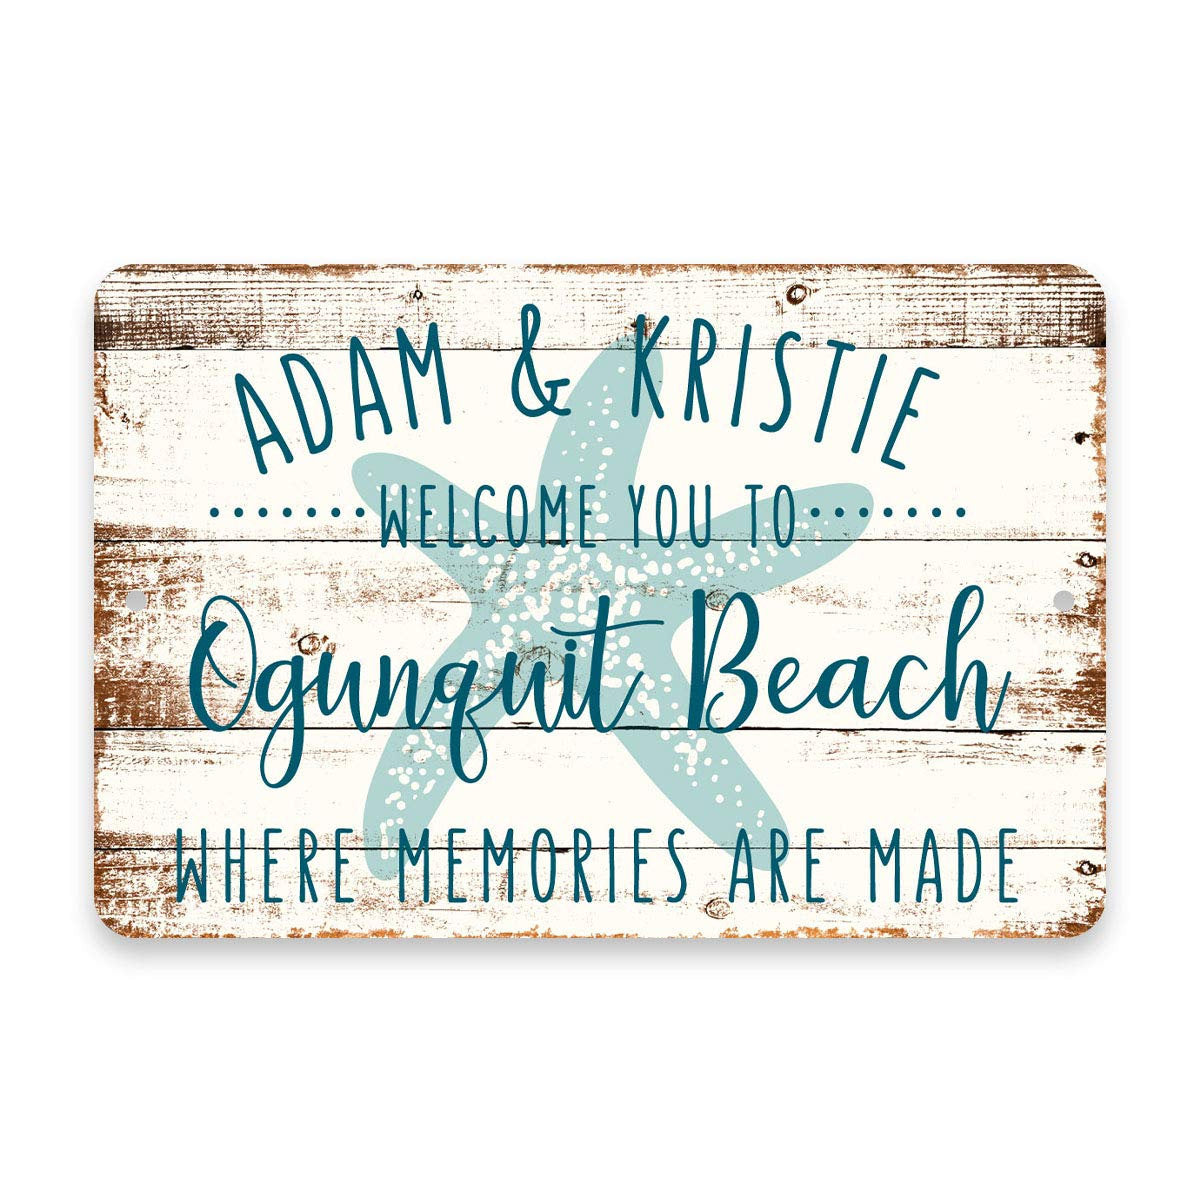 Personalized Welcome to Ogunquit Beach Where Memories are Made Sign - 8 X 12 Metal Sign with Wood Look